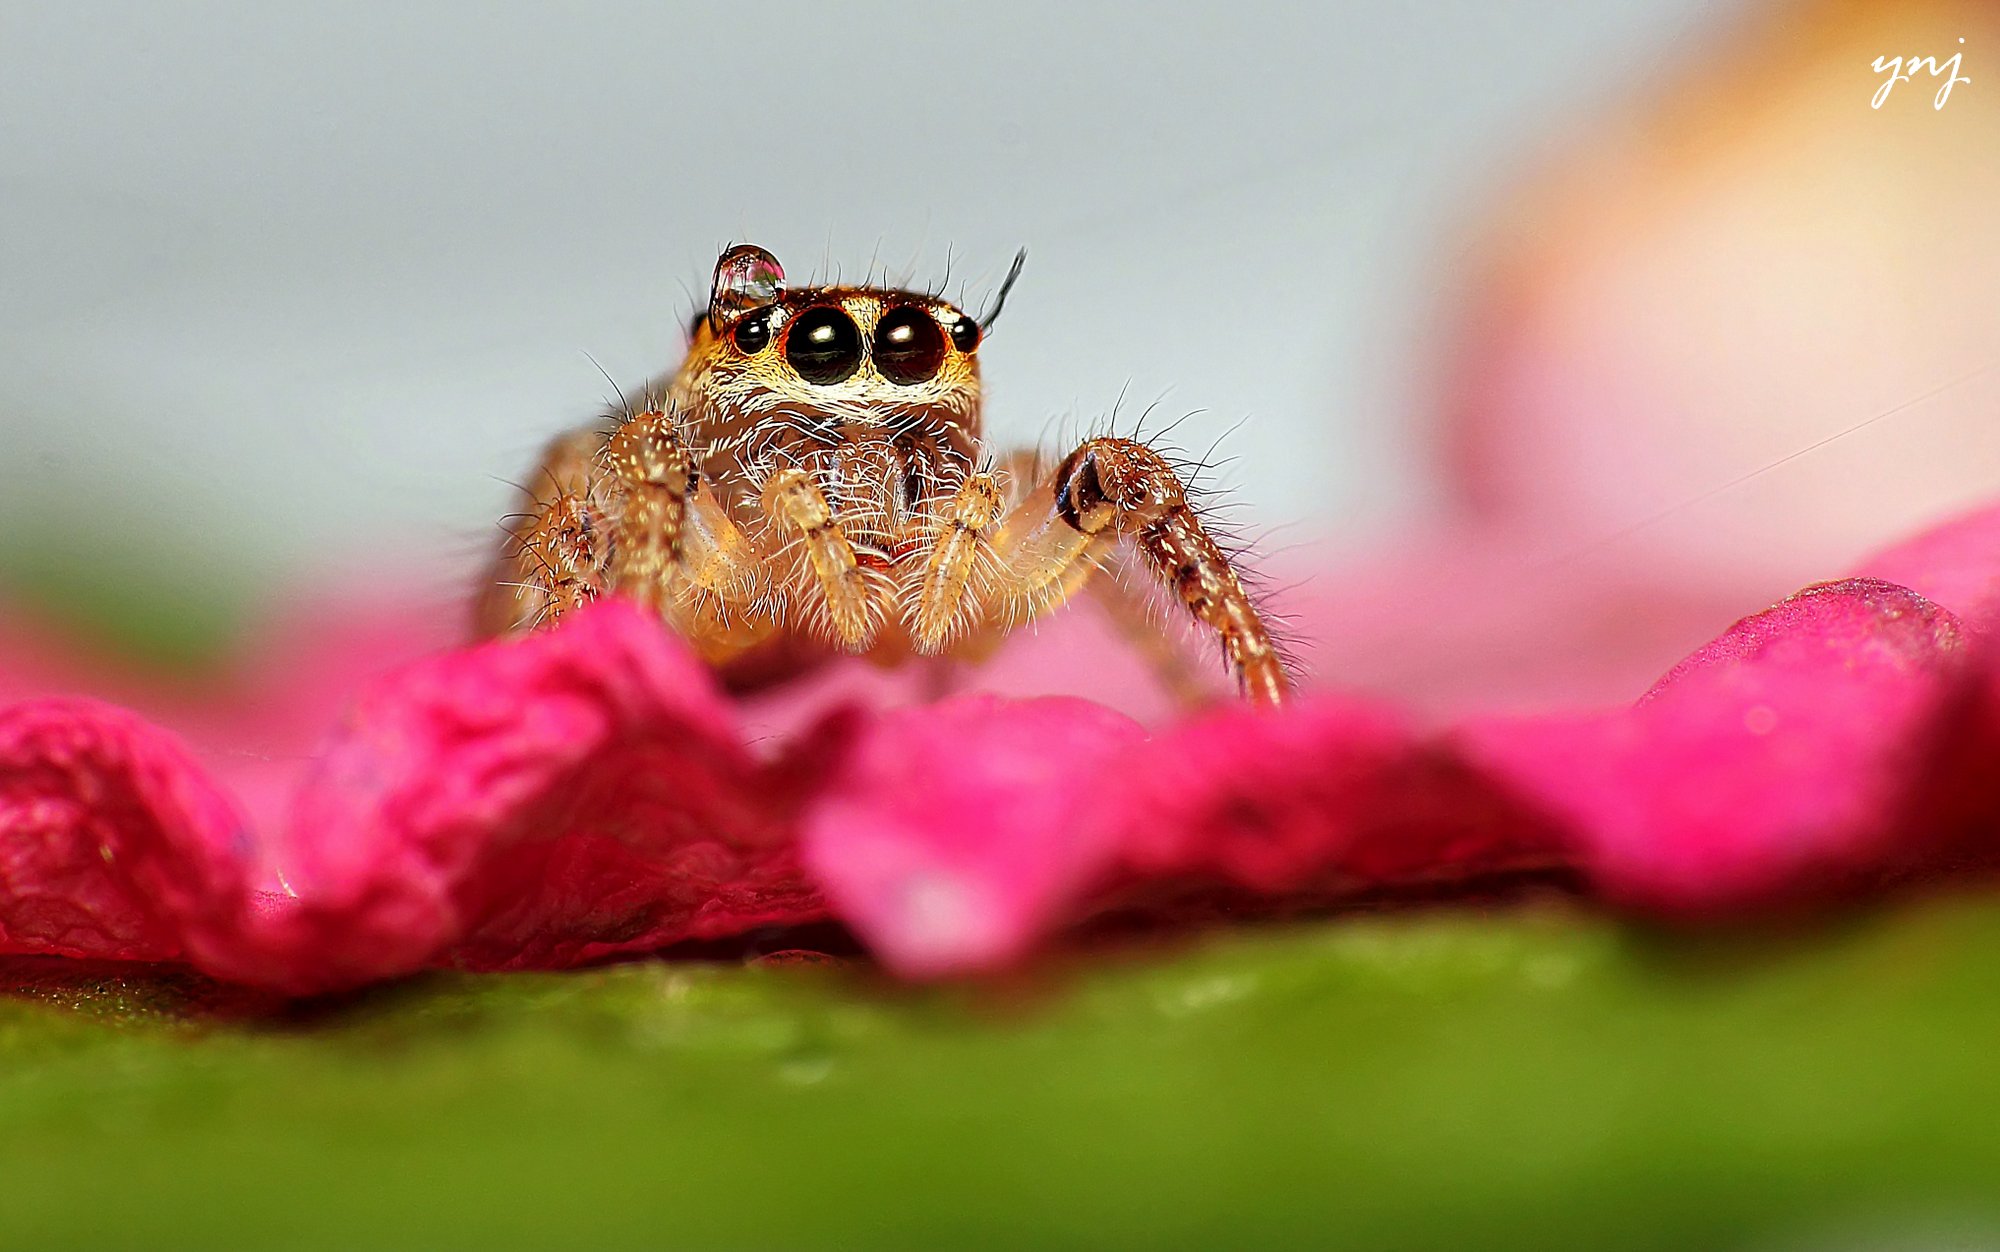 Water Drop and also a jumping spider! (9291534974)